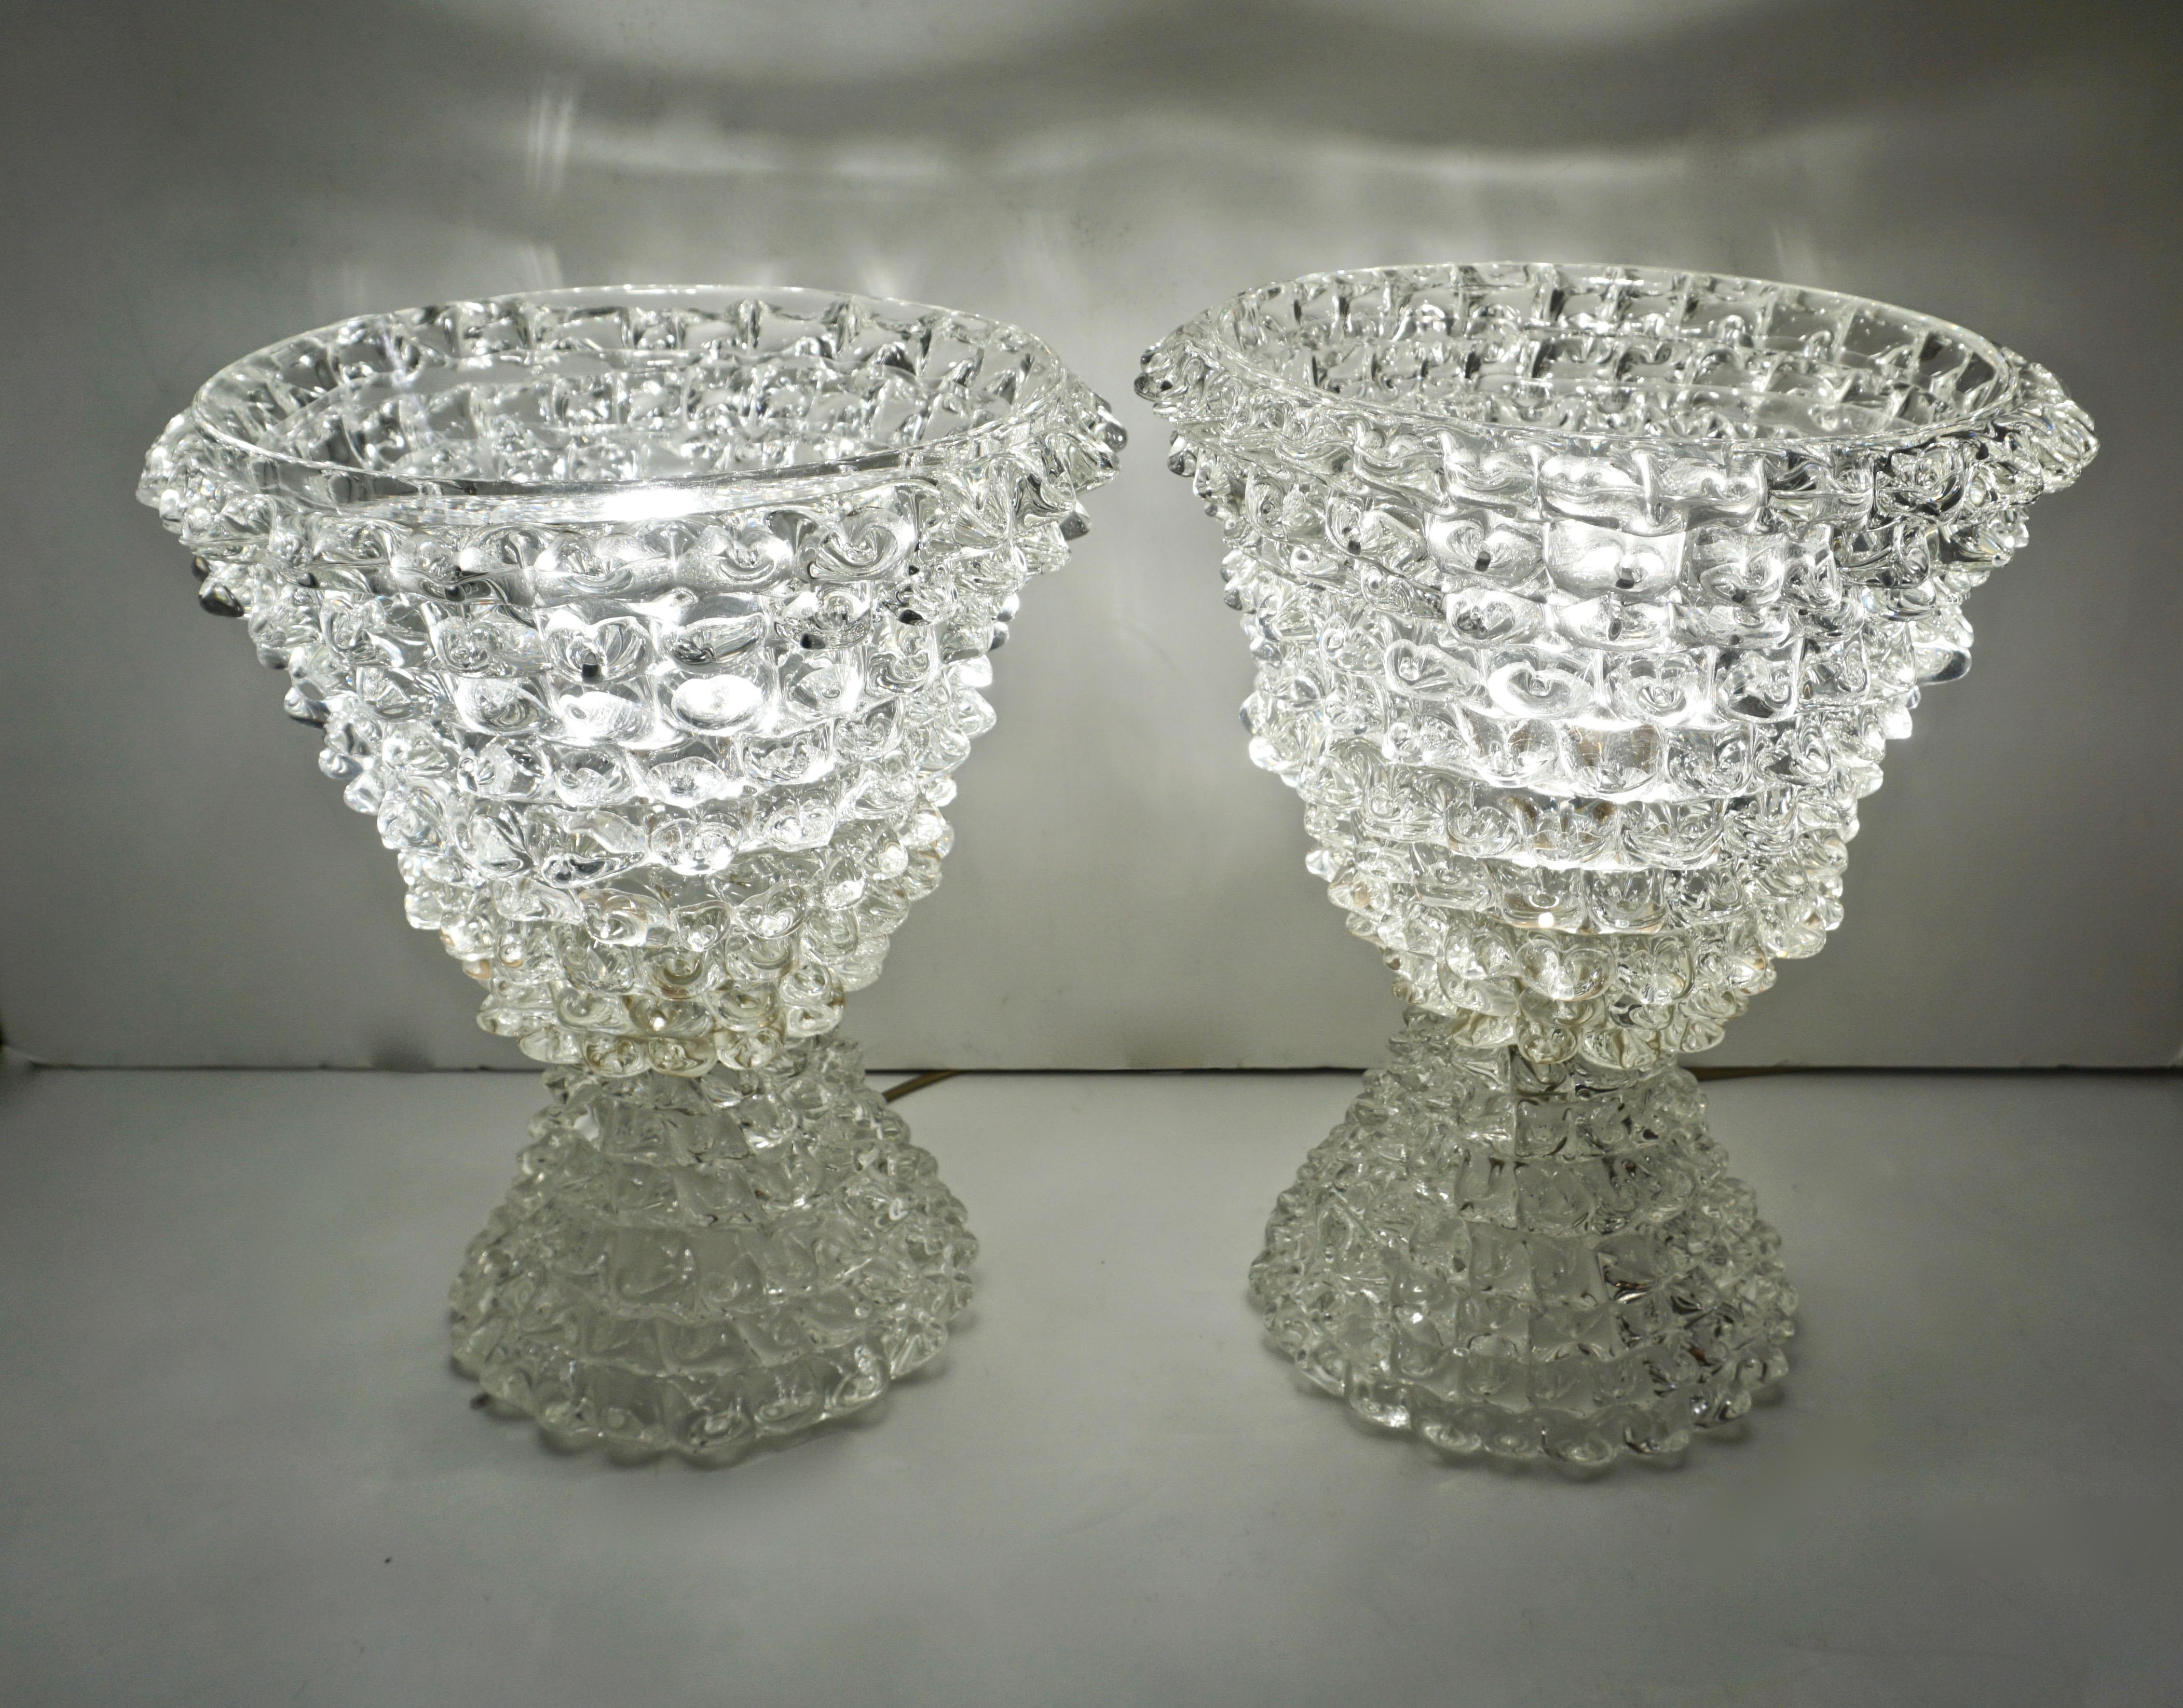 Exceptional pair of Murano glass lamps in the manner of Barovier, the blown crystal clear Murano glass worked with Rostrato, a difficult technique to master, that creates a 3-D spiked design playing with light and enhancing reflections, a decor